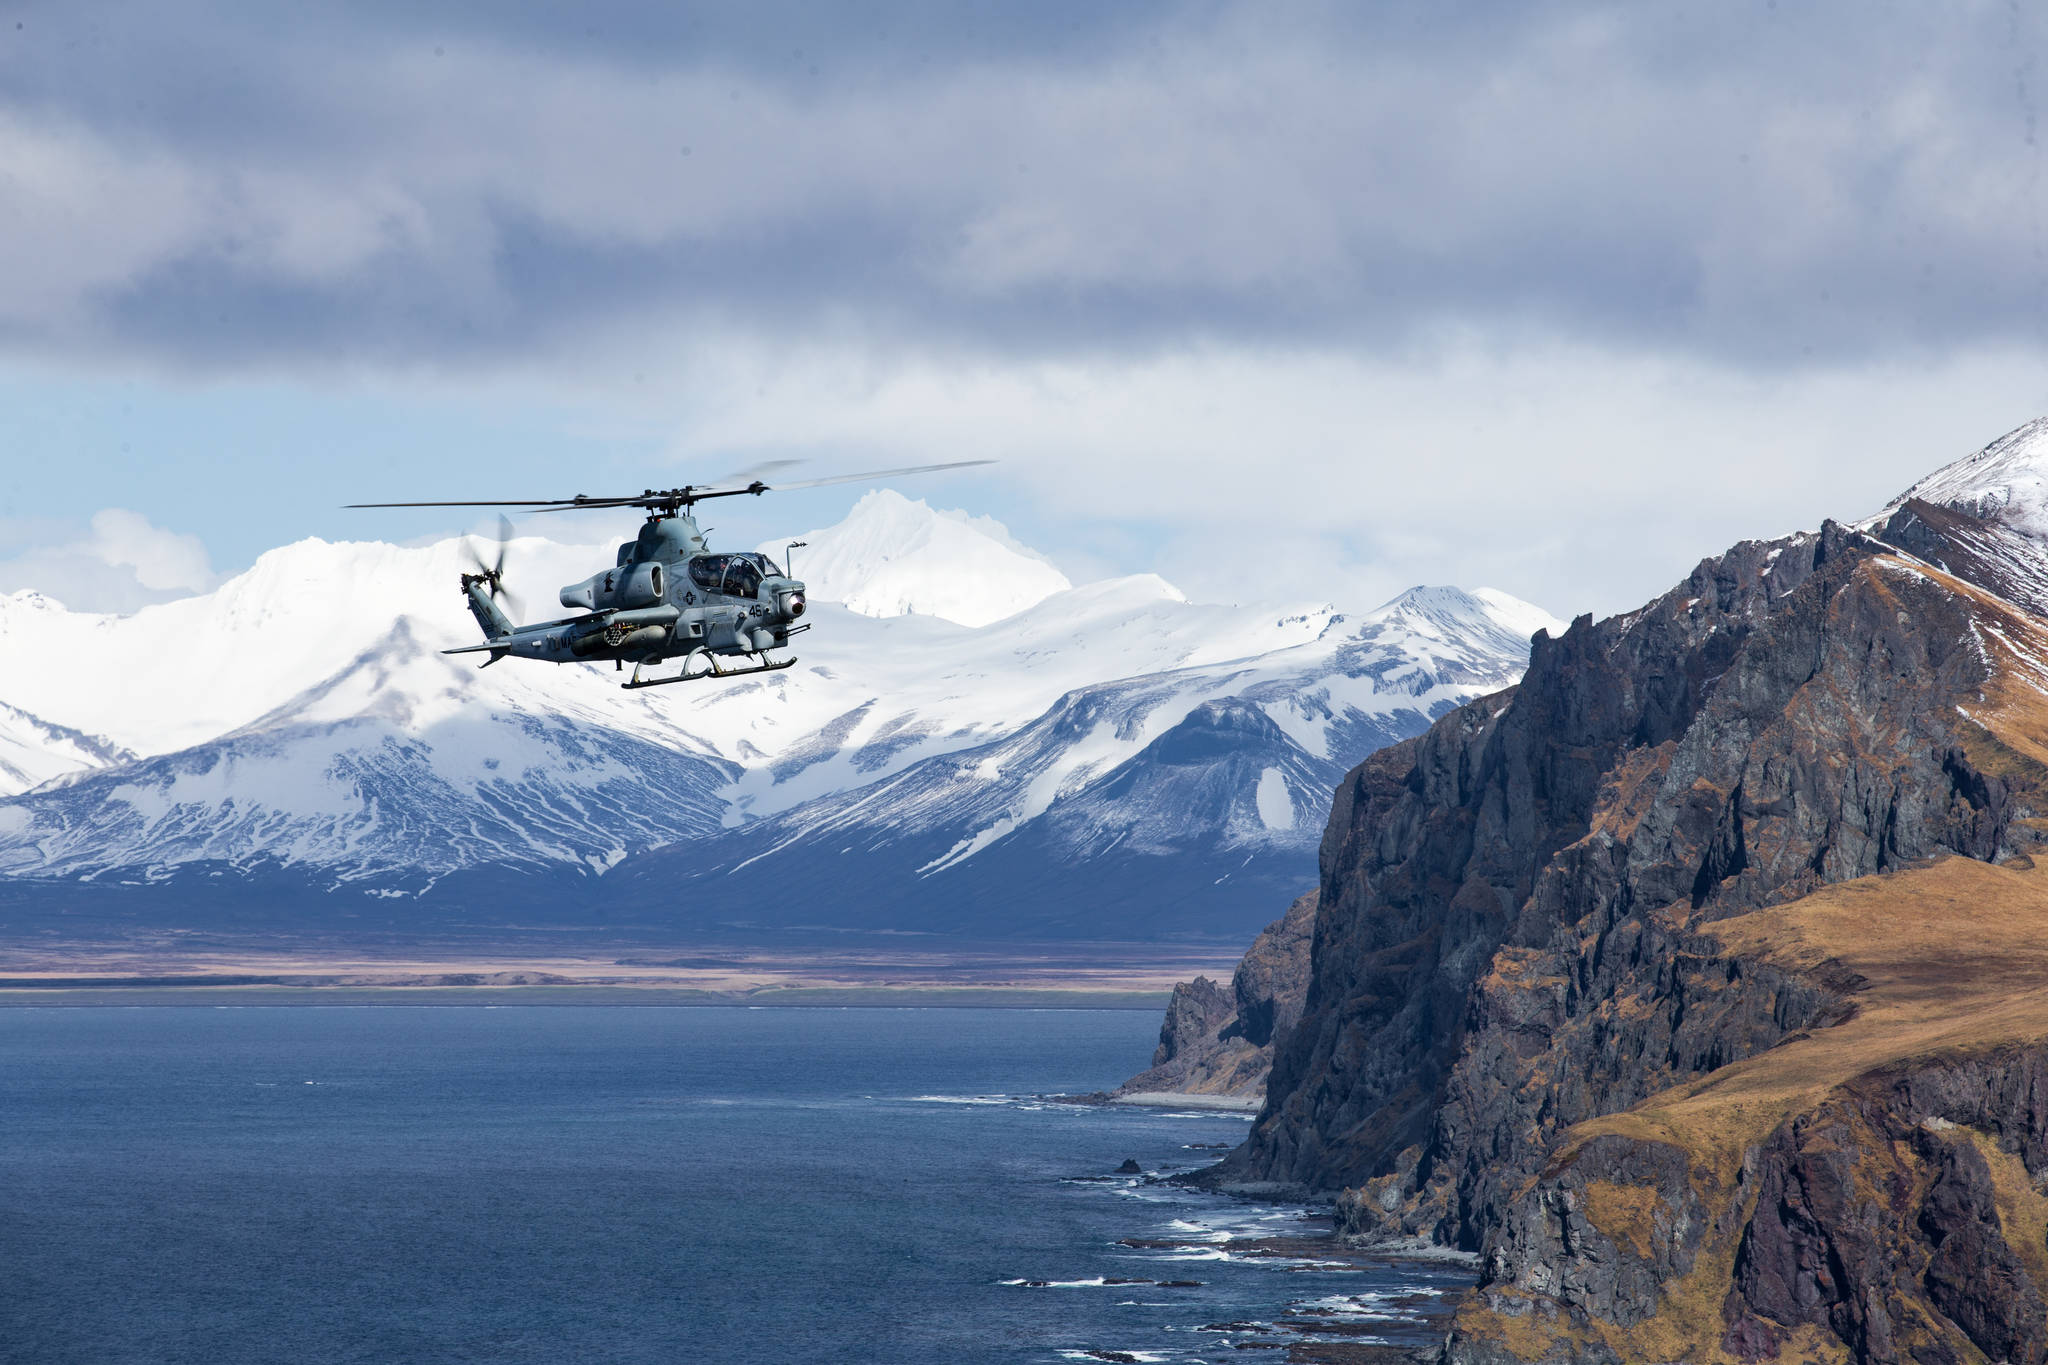 A U.S. Marine Corps AH-1Z Viper assigned to Marine Medium Tiltrotor Squadron 164 (Reinforced), 15th Marine Expeditionary Unit flies over the Gulf of Alaska in support of Northern Edge 2021. (U.S. Marine Corps / Lance Cpl. Brendan Mullin)